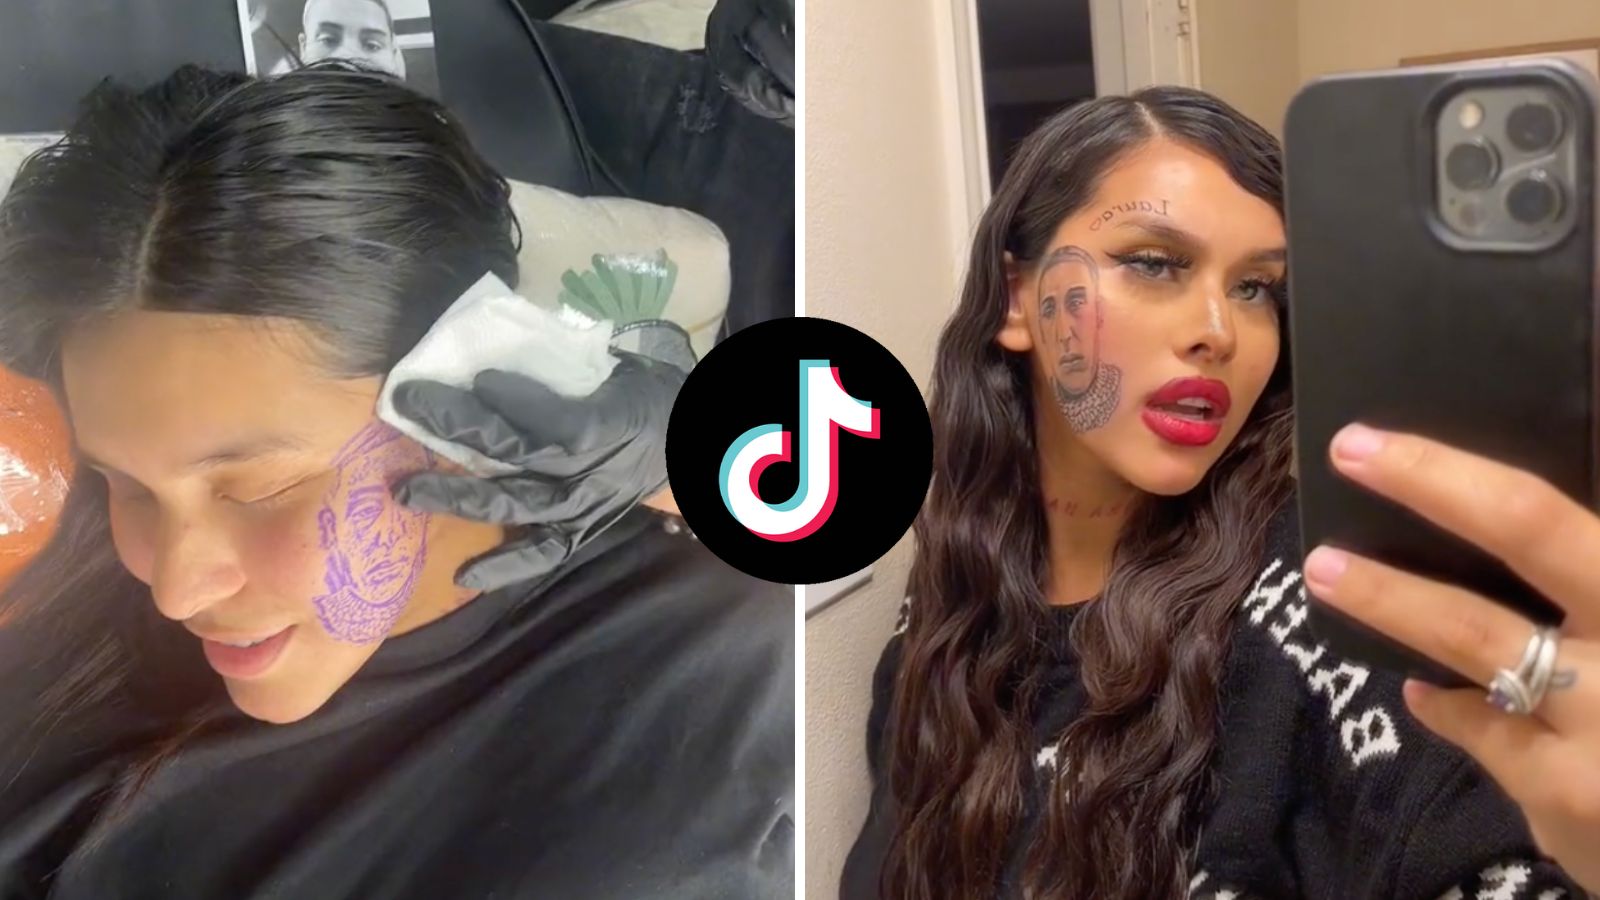 Girlfriend Tattoos Partner On Her Face! 👀😳 #fyp #foryou #relations, face tattoo